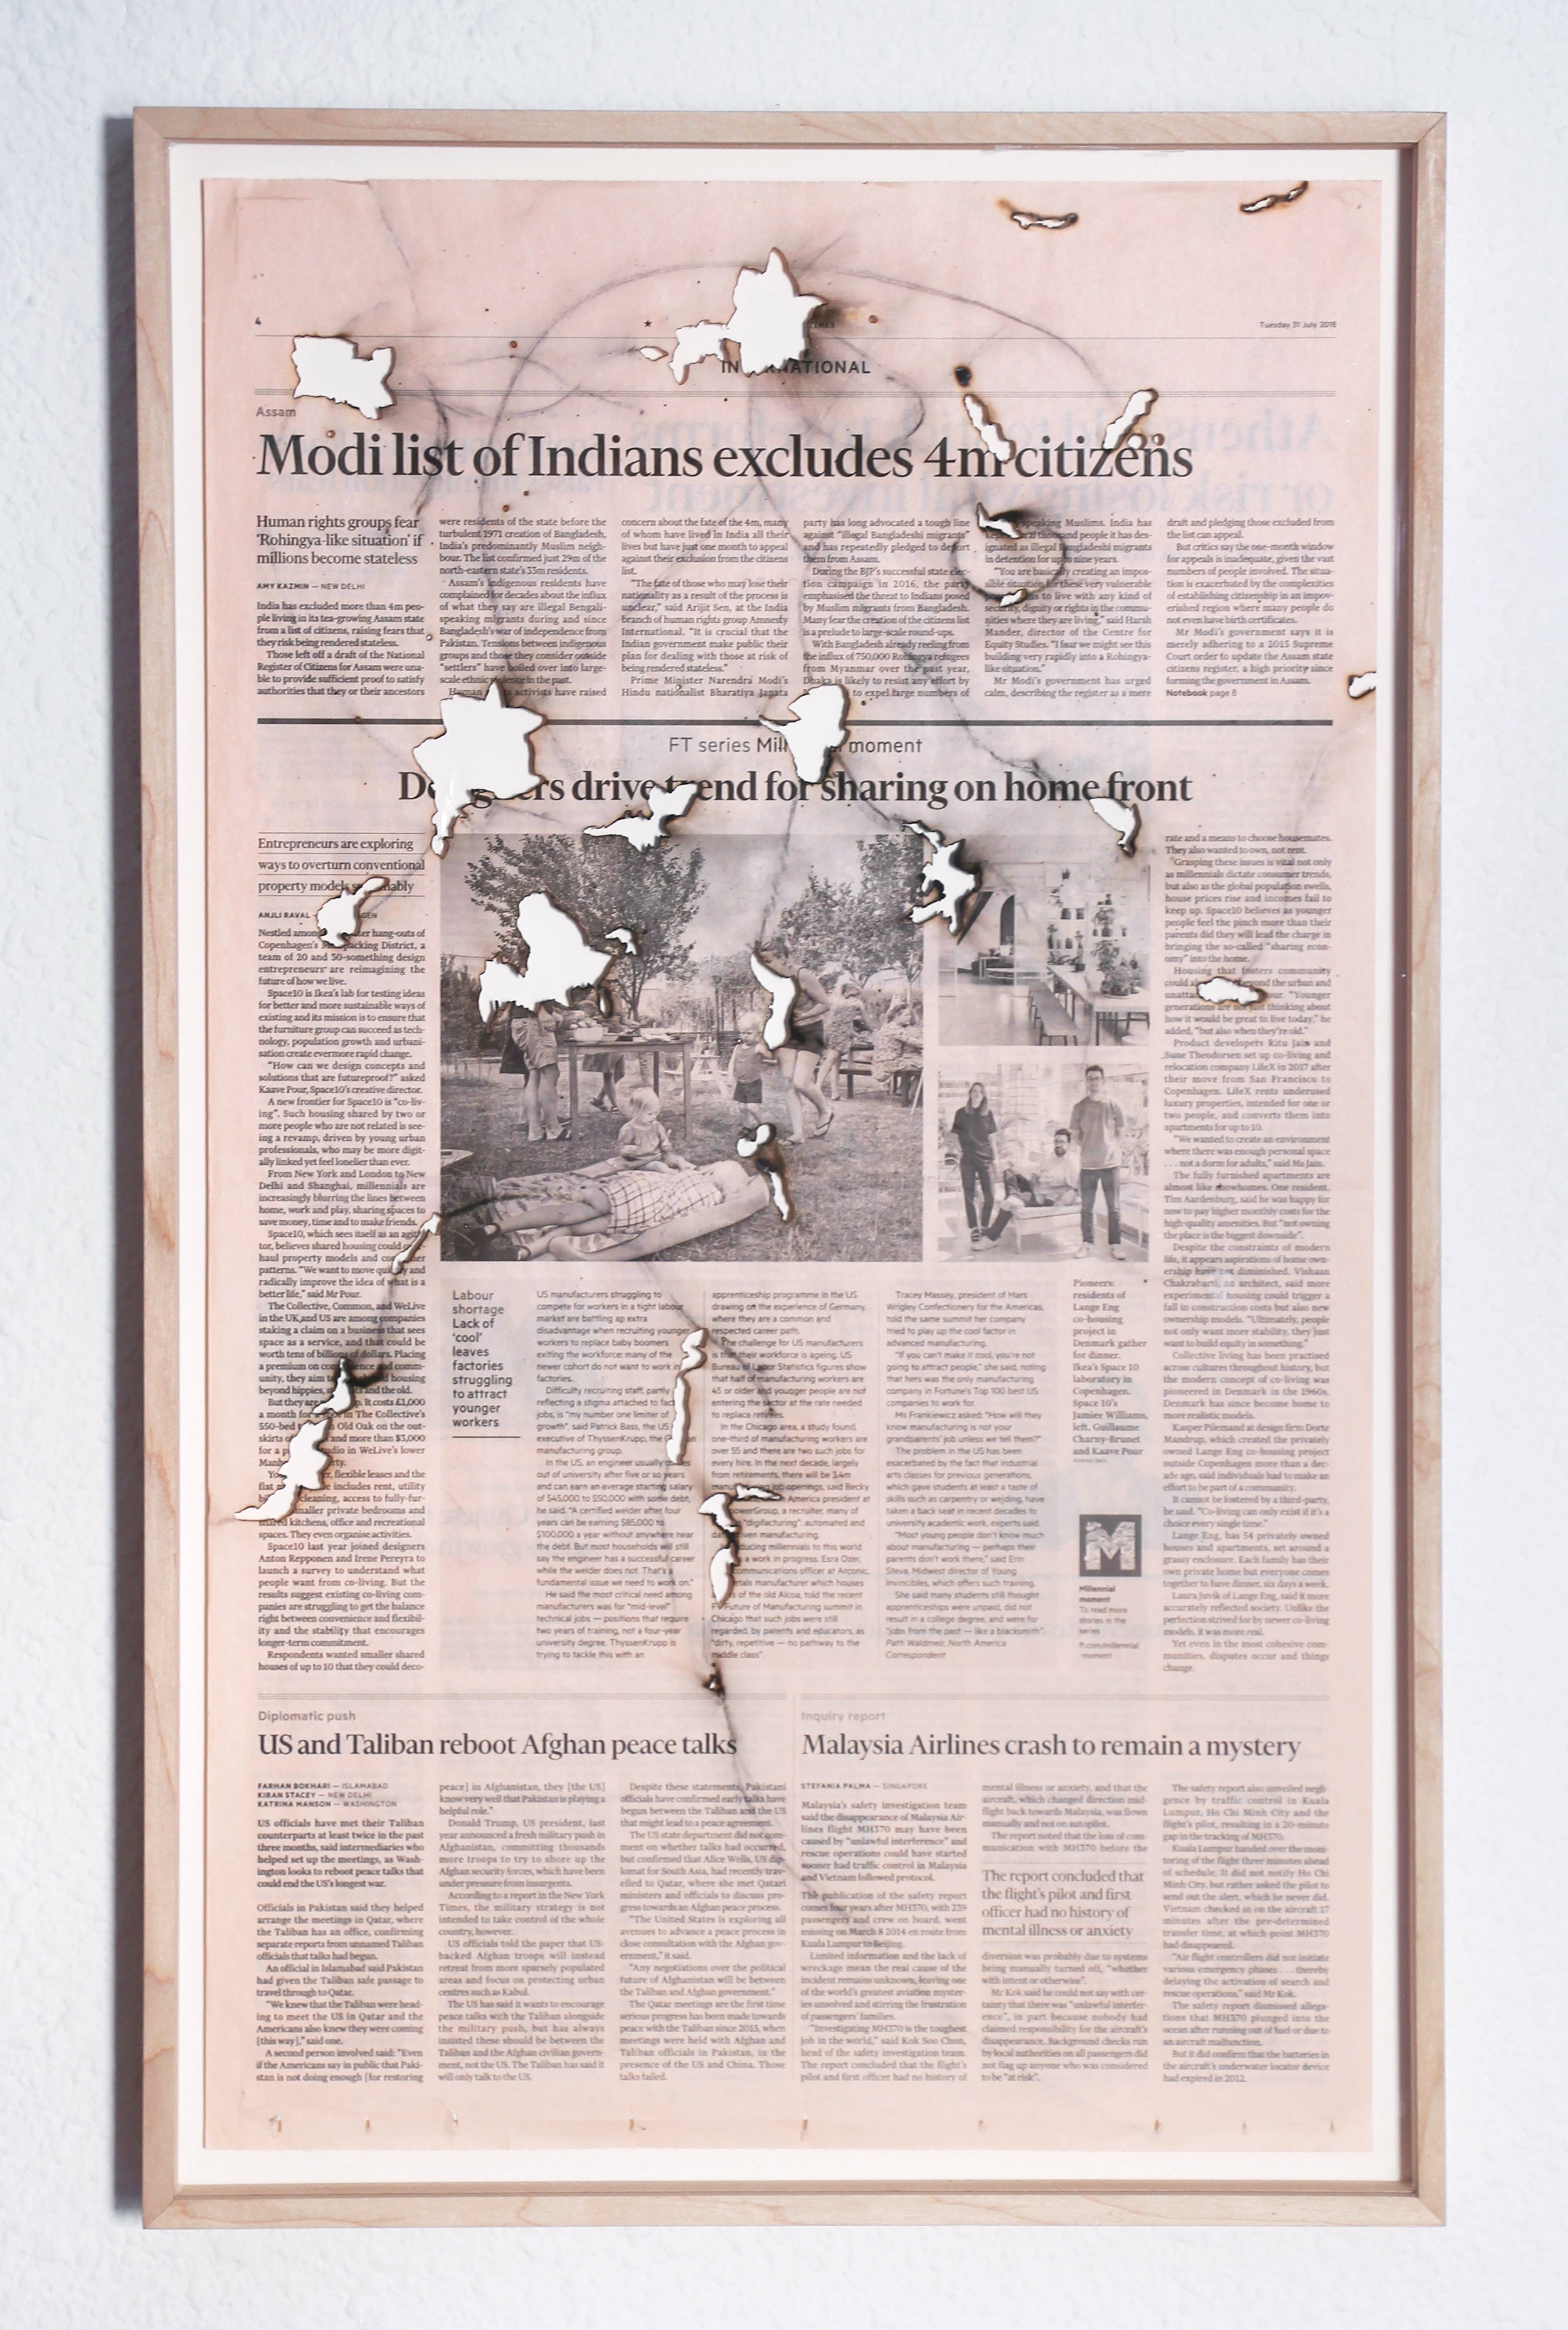   Daily Sketches, Financial Times #1 , The Financial Times newspaper, pirotecnicfuse, 59,5cm x 37cm x 4,5cm framed (Maple, Anti-UV Museum glass), 2018 